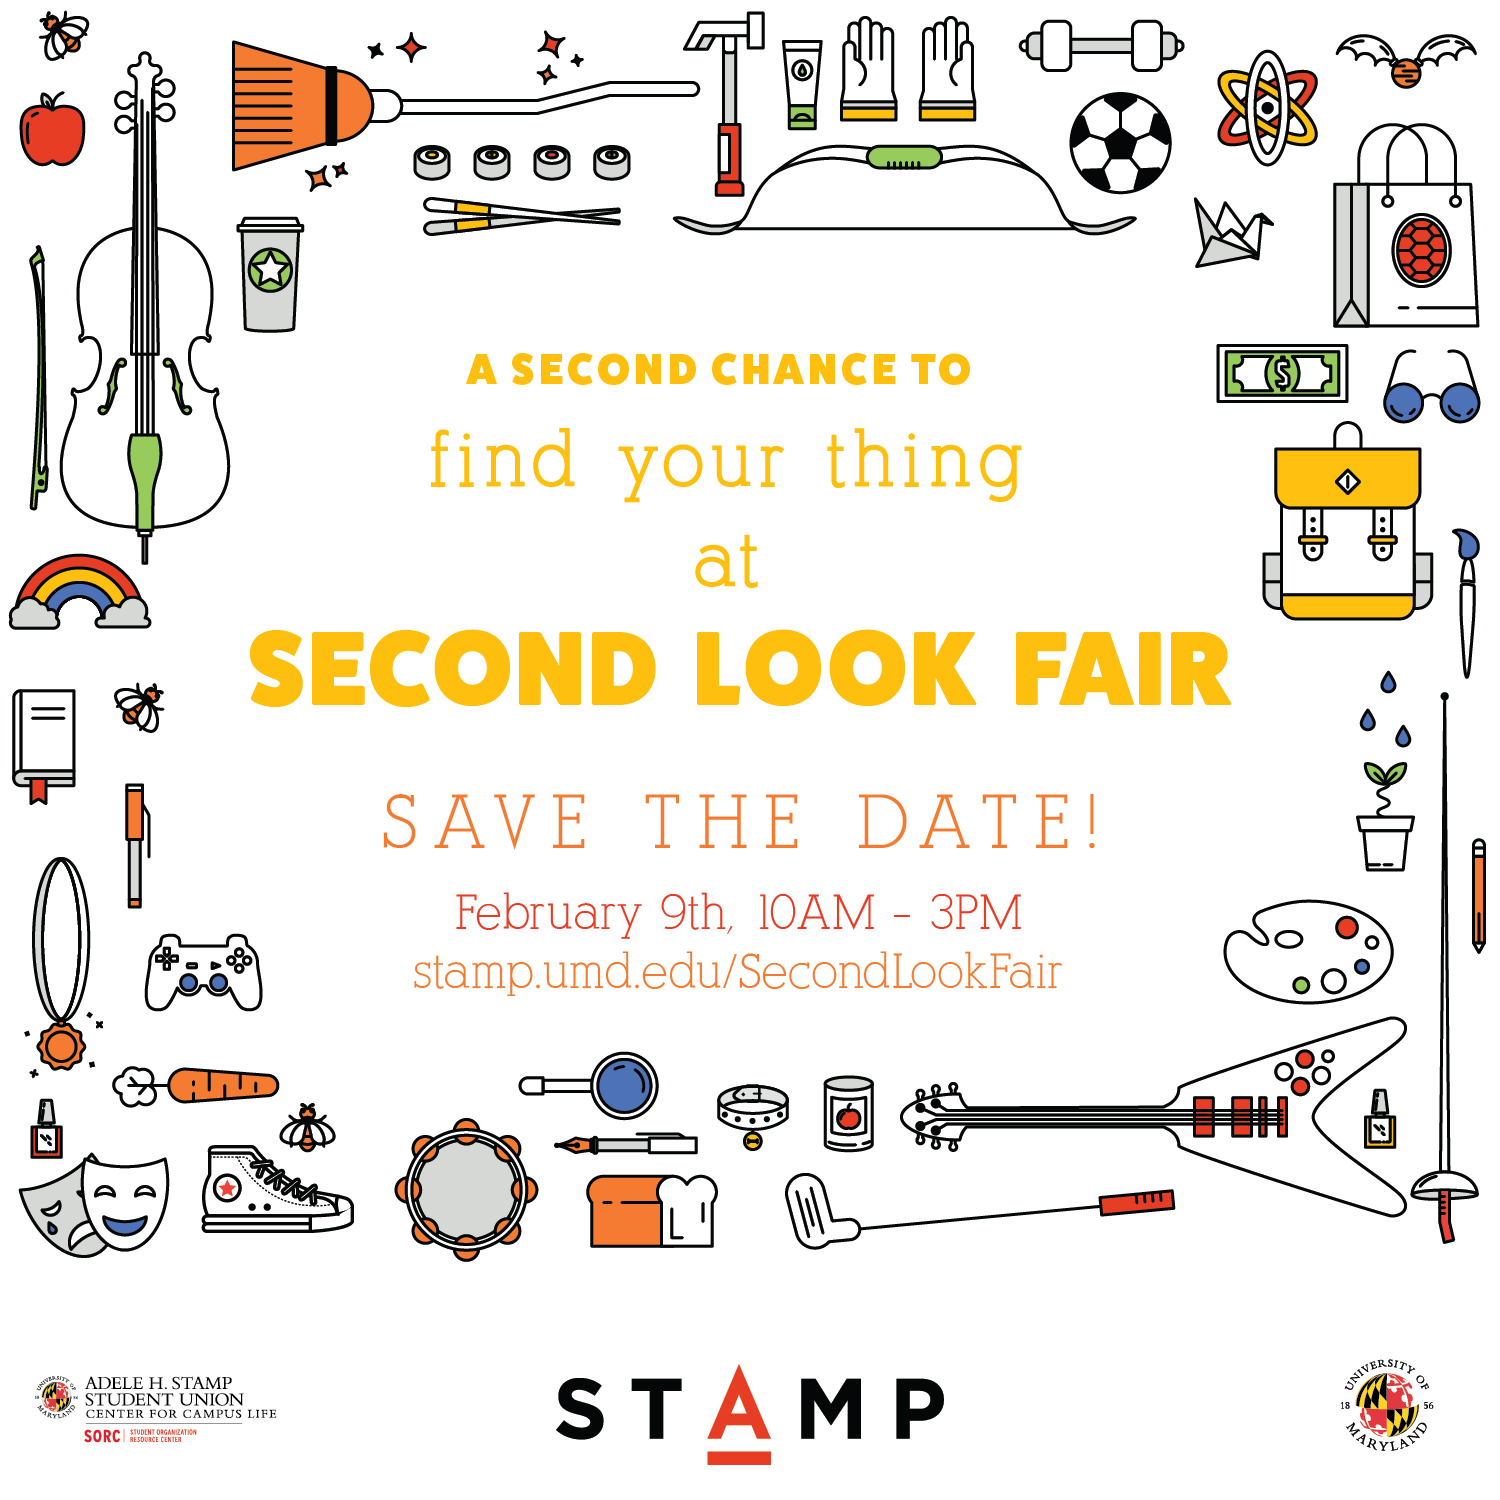 Second Look Fair image - Save the Date (February 9 from 10:00AM - 3:00PM)